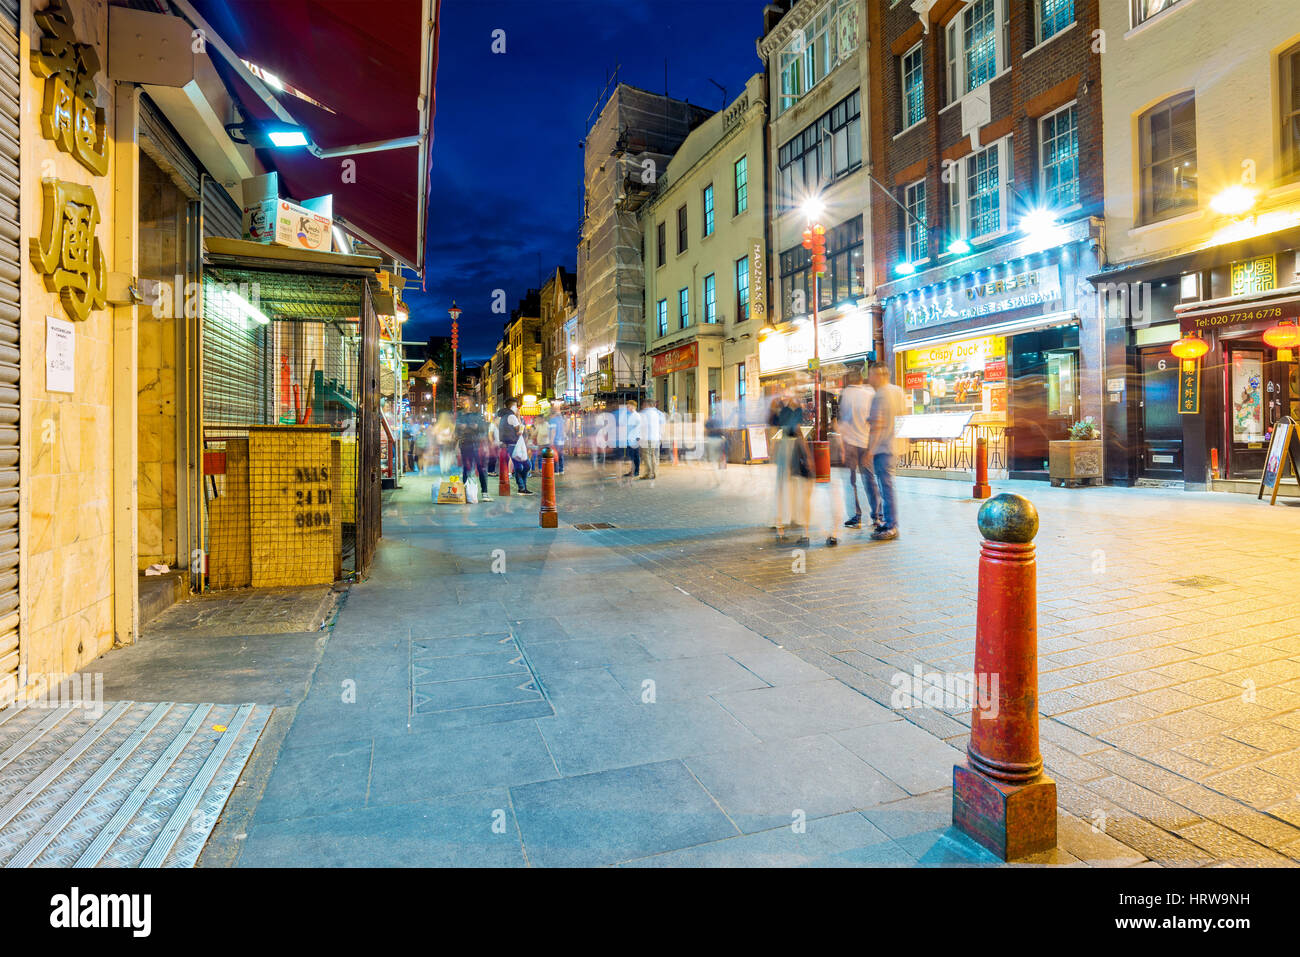 LONDON - SEPTEMBER 08: Night view of the famous Gerrard street which is the main street of London's chinatown at night on September 8th, 2016 in Londo Stock Photo